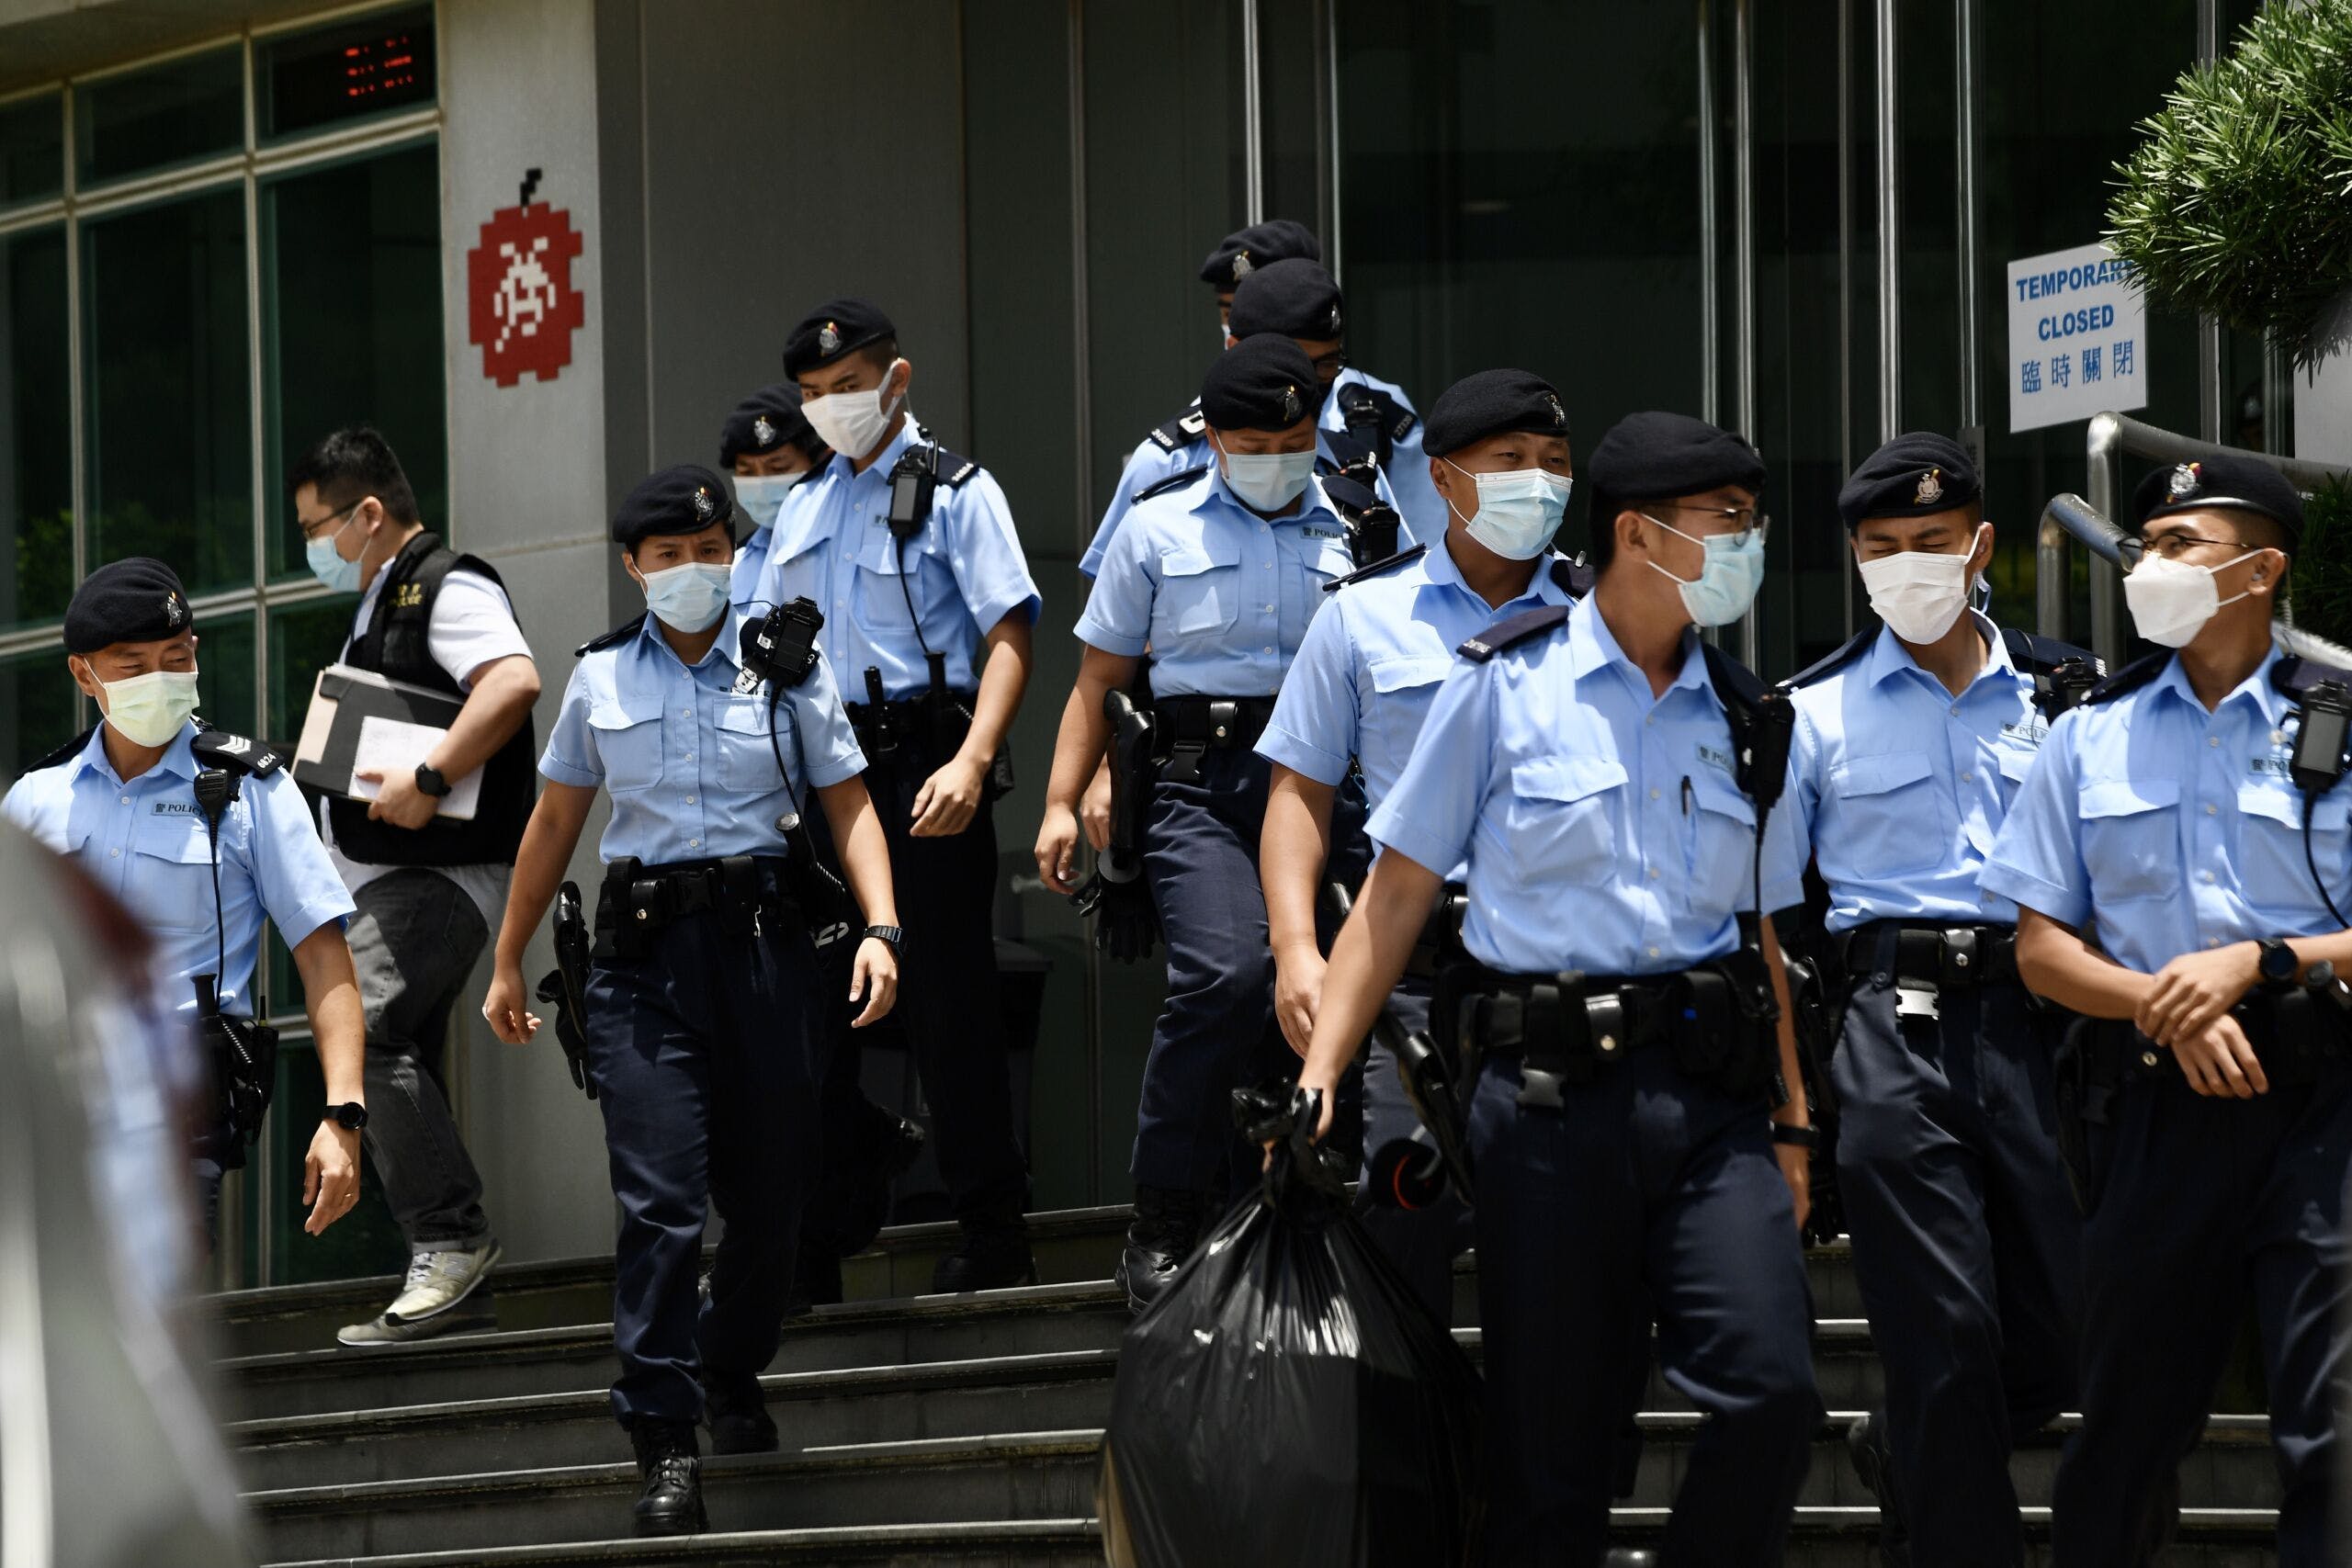 China's national security law imposes restrictions on Hong Kong